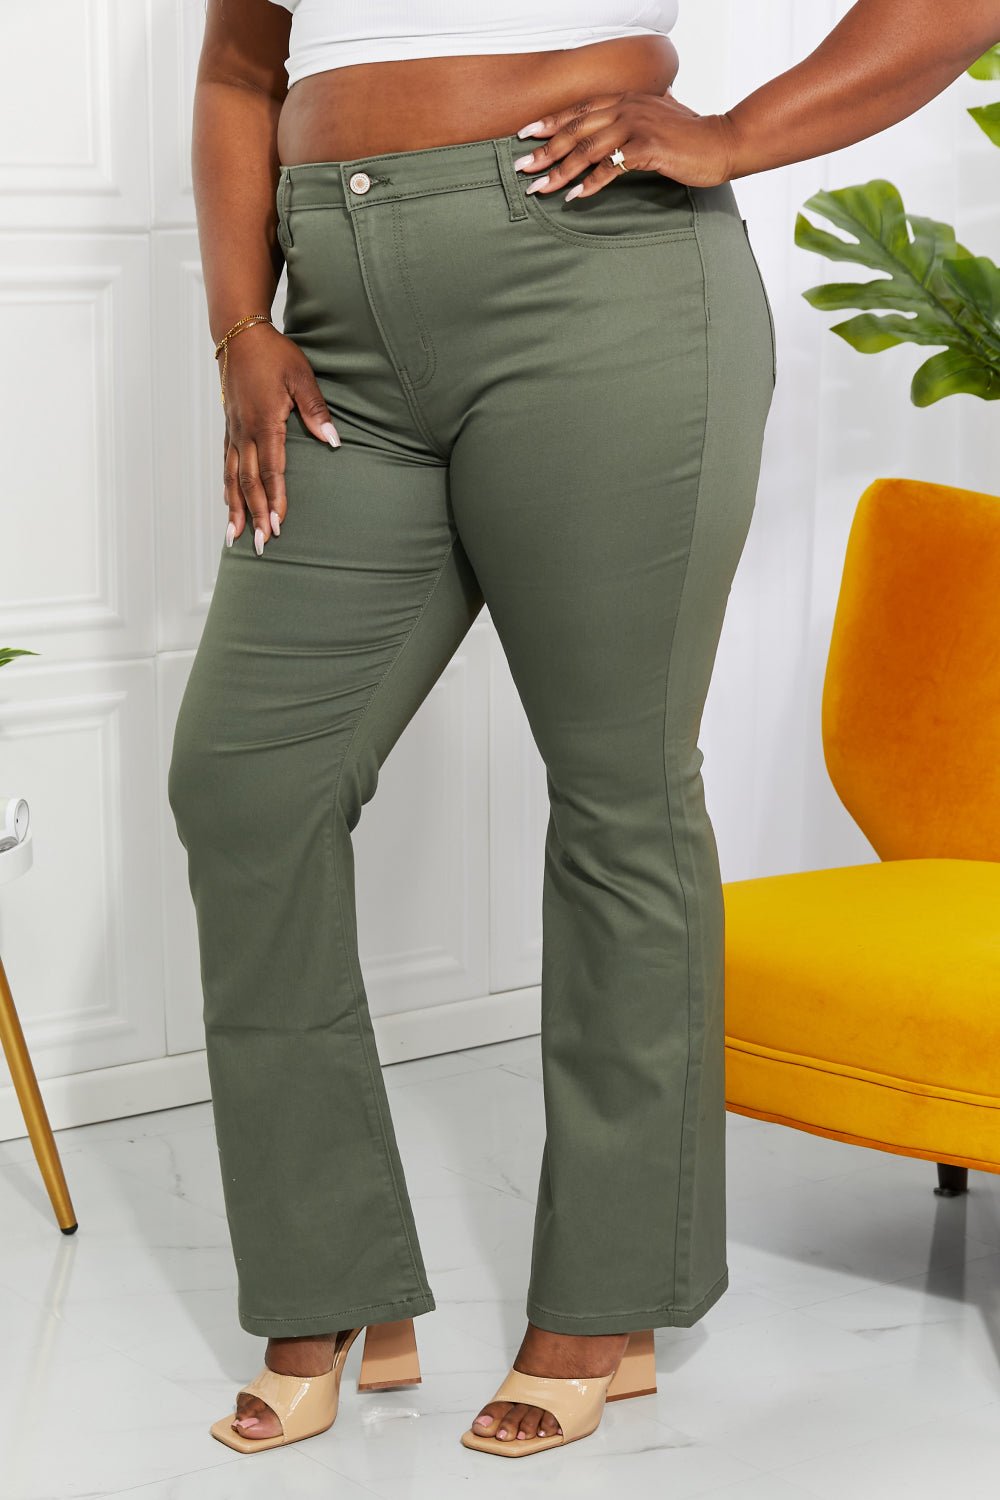 Zenana Clementine Full Size High-Rise Bootcut Jeans in Olive - pvmark